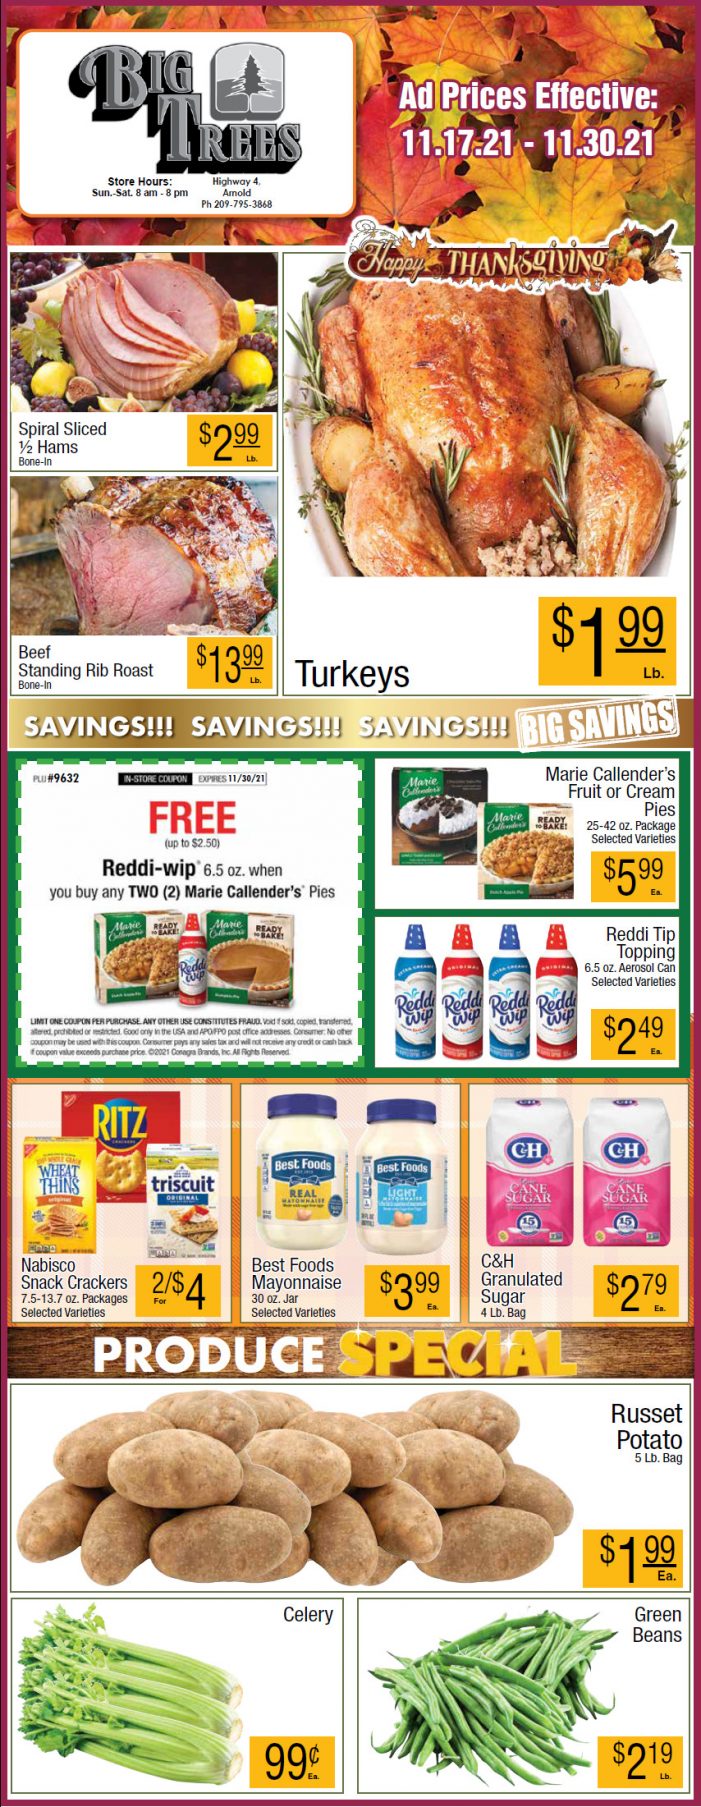 Big Trees Market Weekly Ad & Grocery Specials Through November 30th! Shop Local & Save for Thanksgiving!